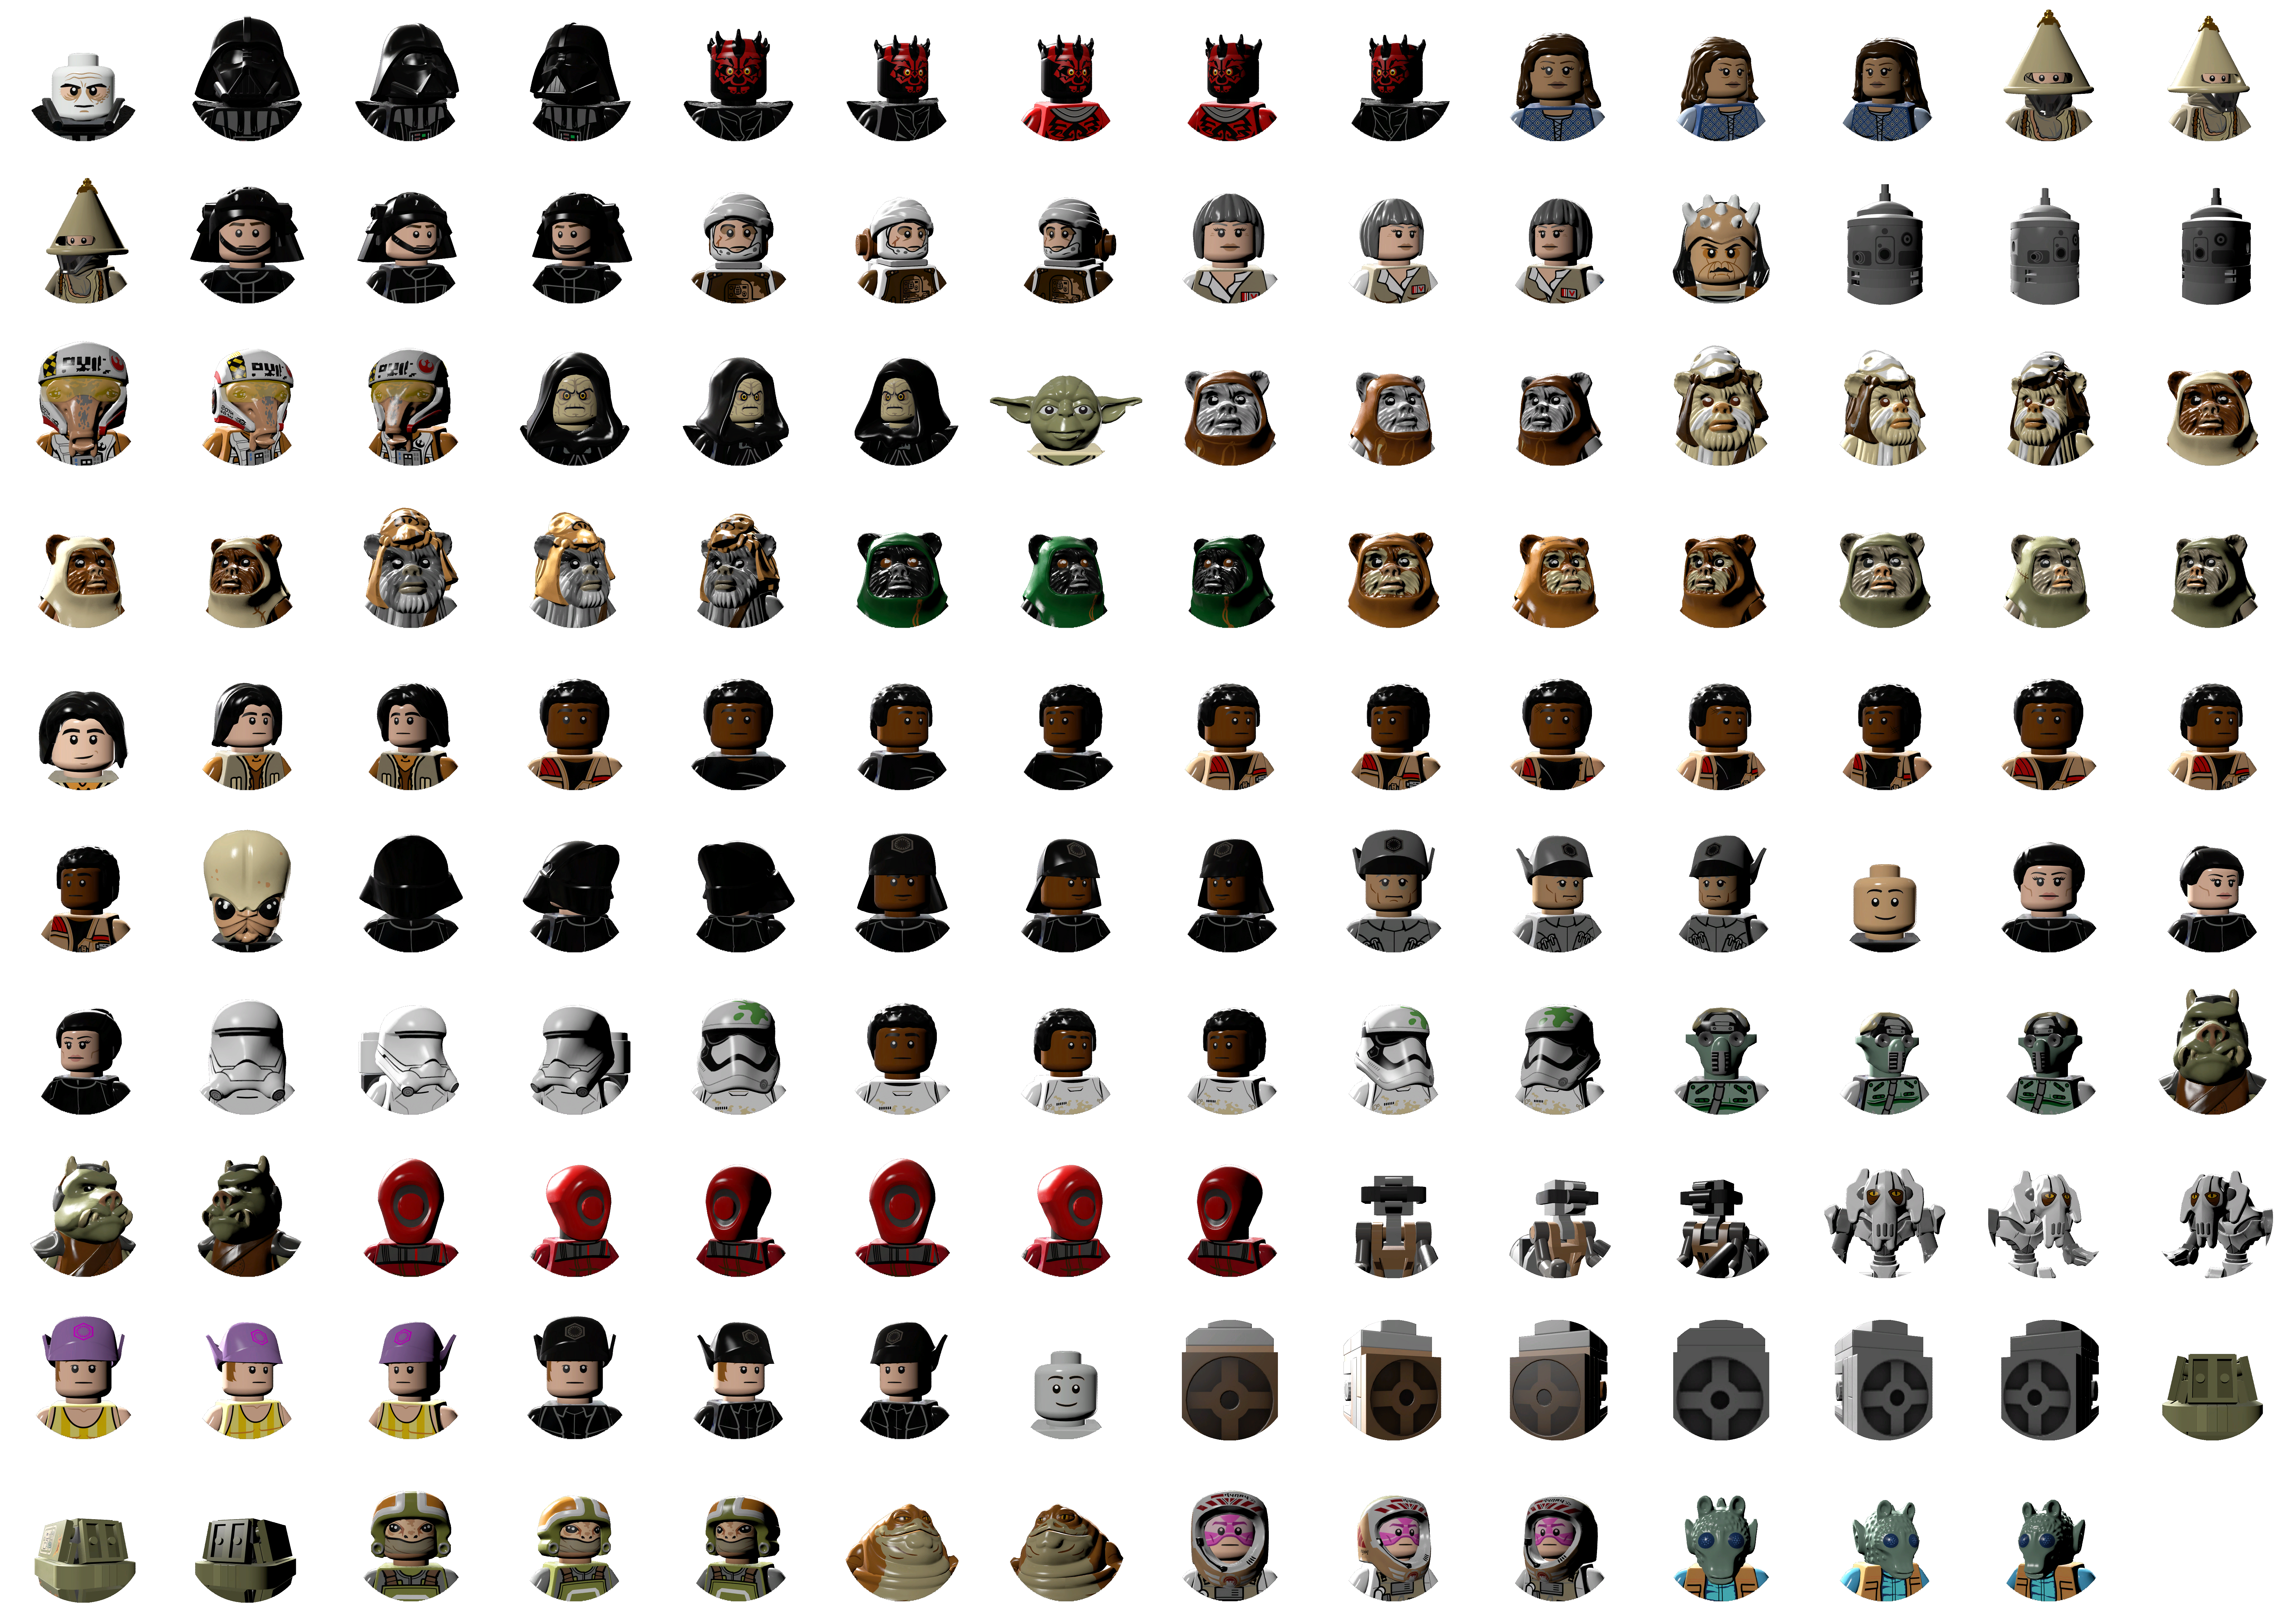 lego star wars the force awakens characters list